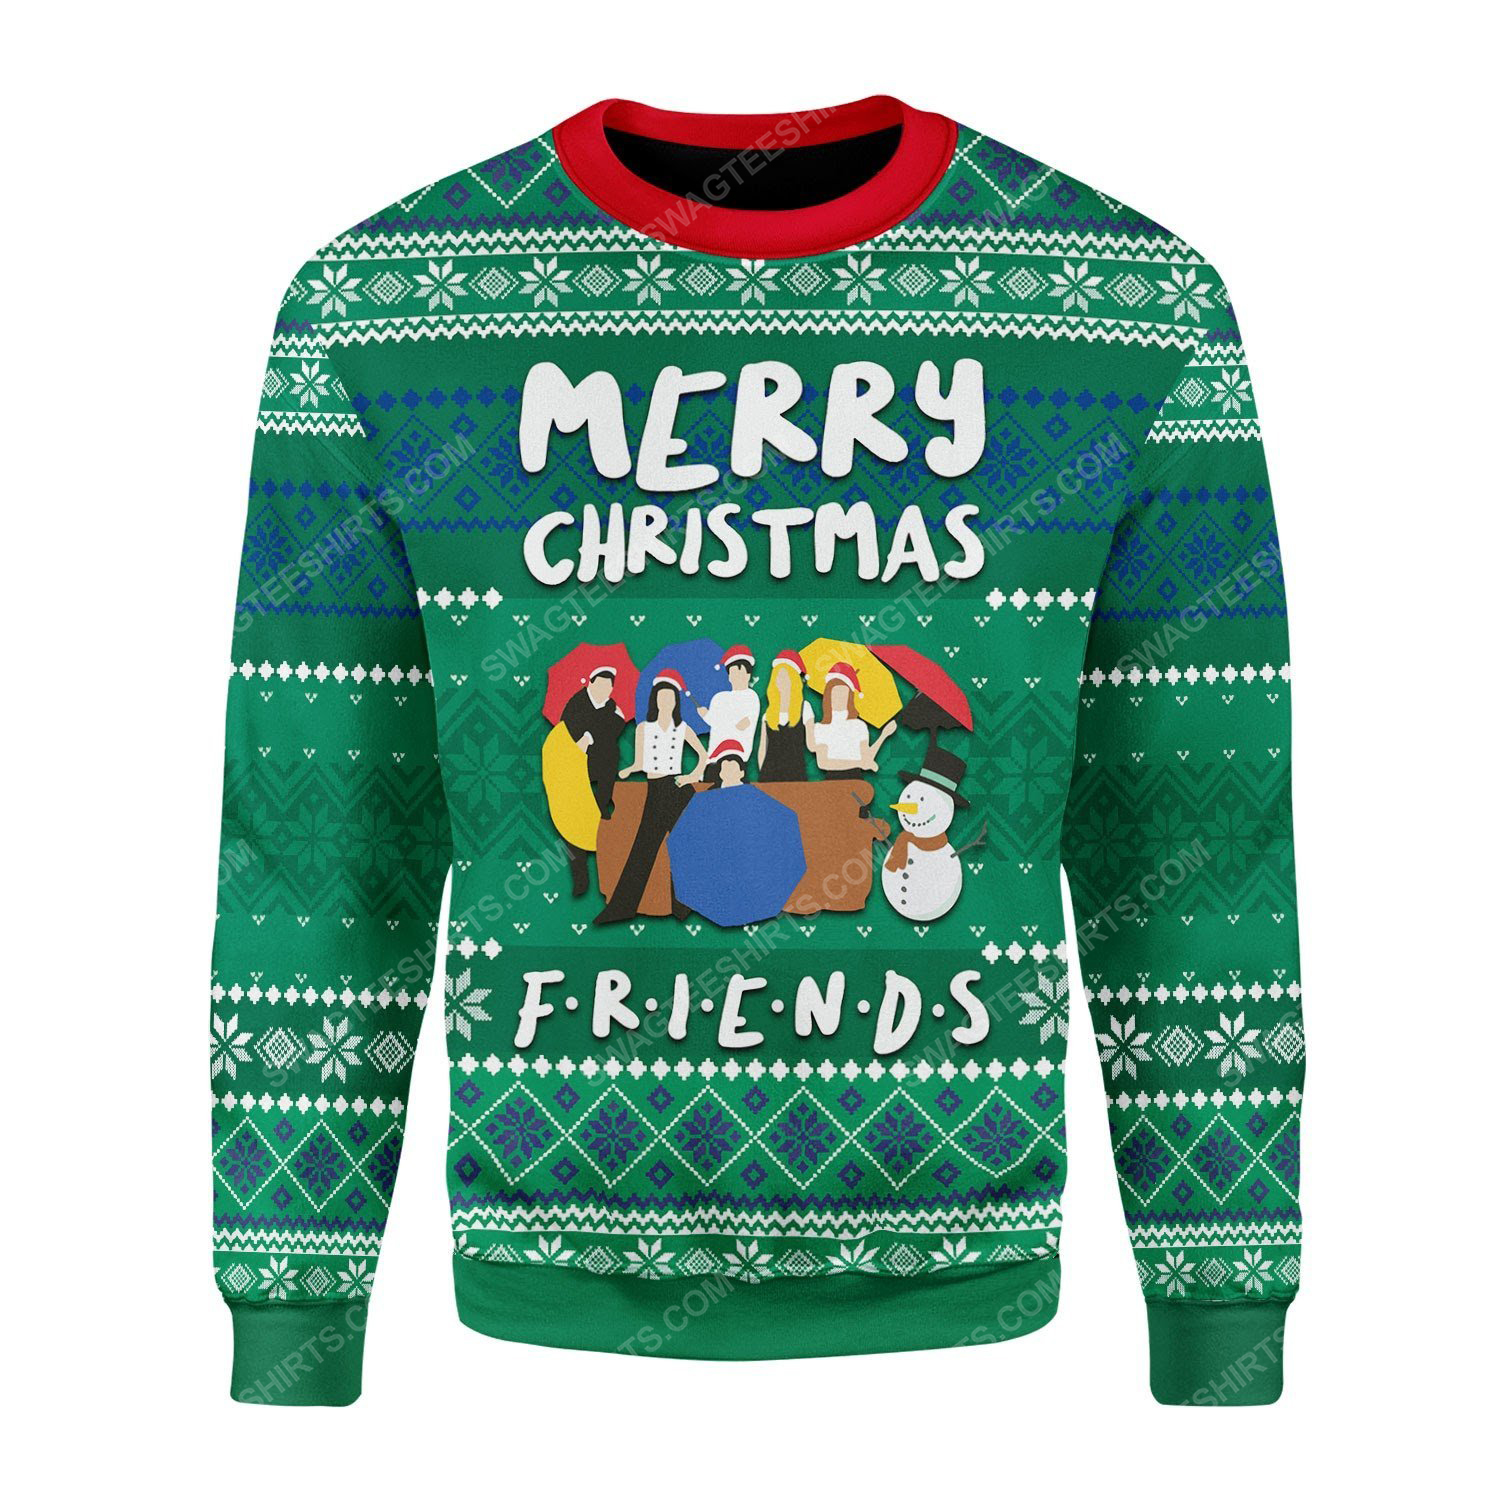 Merry christmas friends tv show ugly christmas sweater